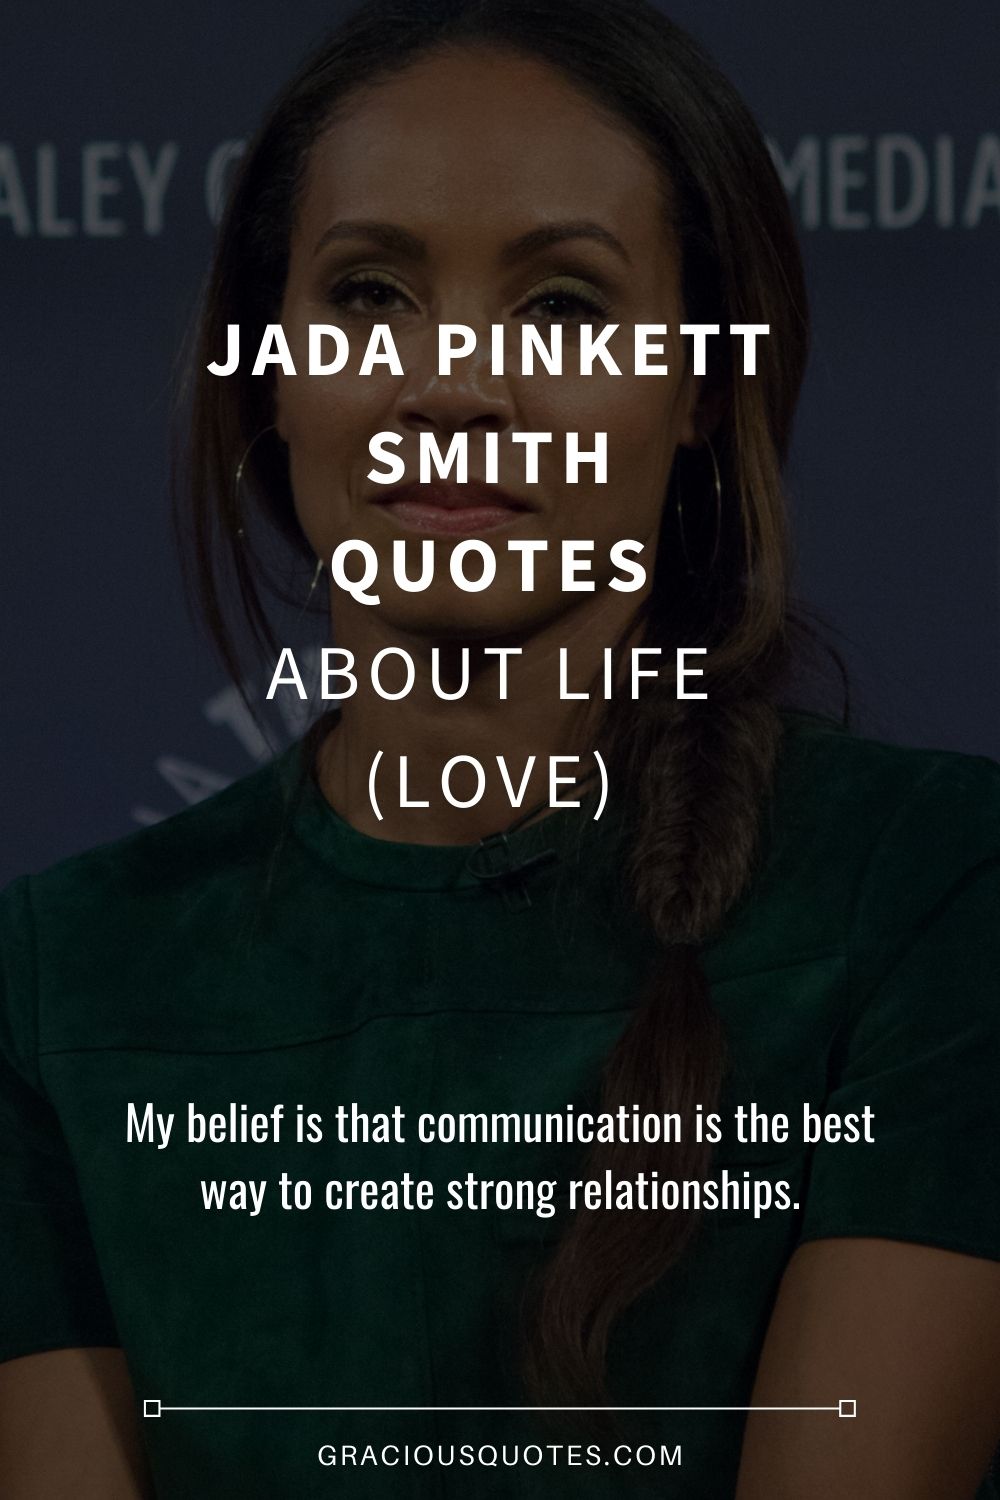 Jada Pinkett Smith Quotes About Life (LOVE) - Gracious Quotes